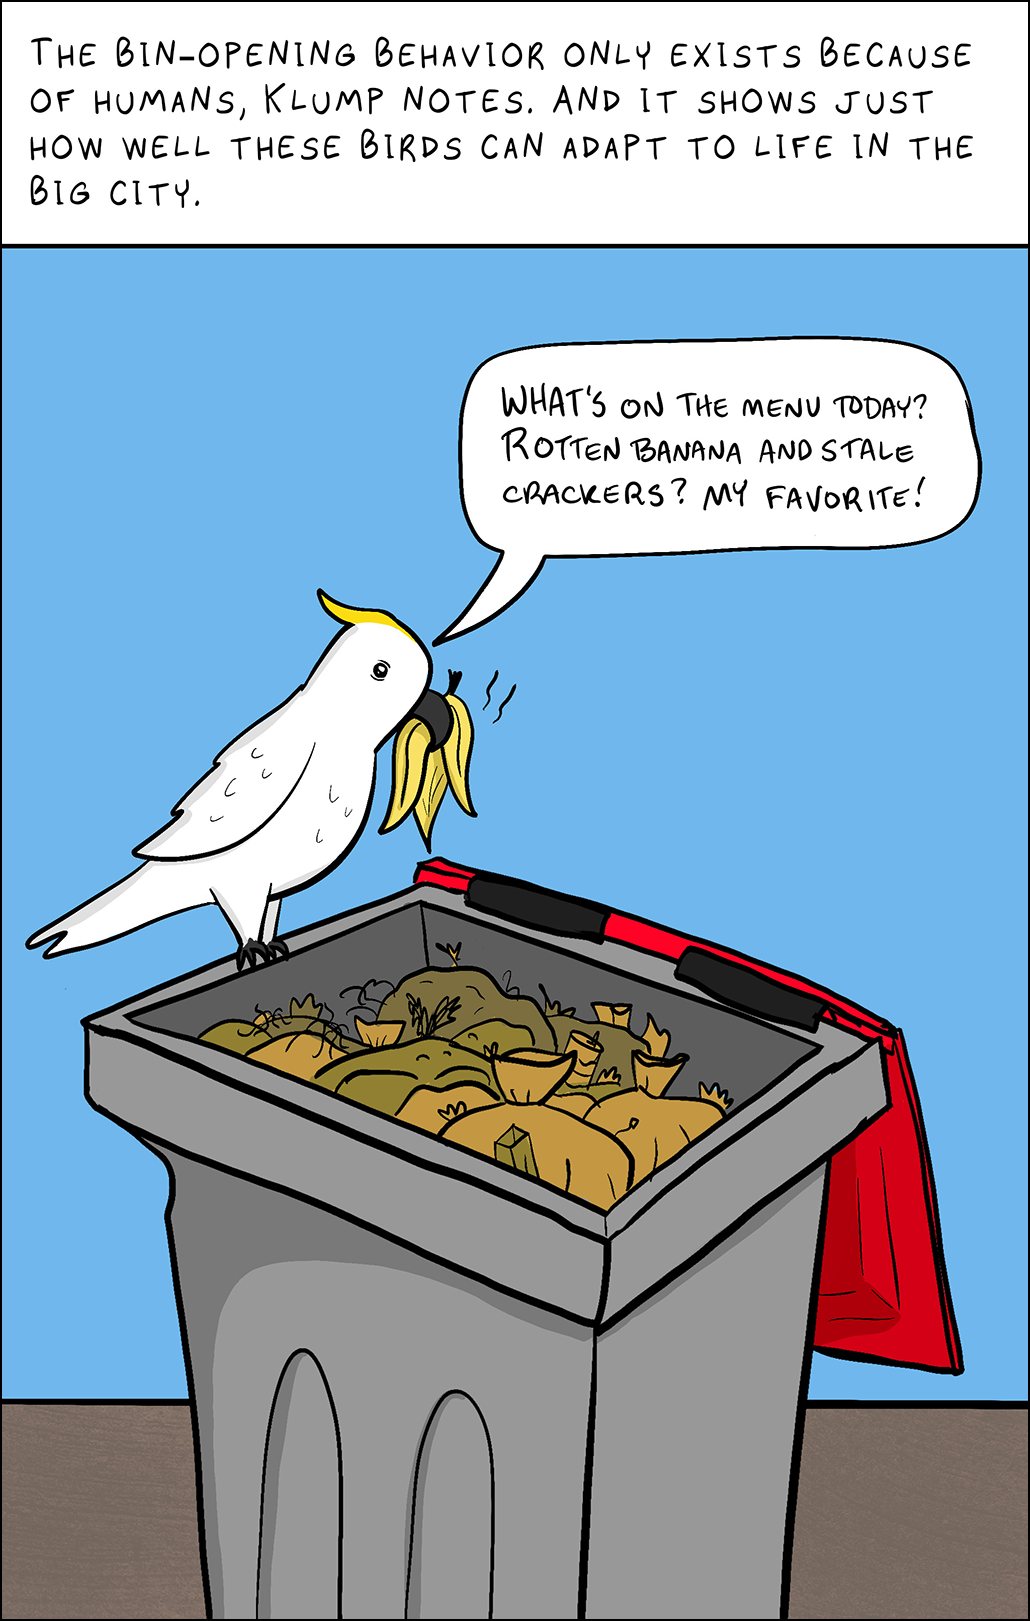 Text: The bin-opening behavior only exists because of humans, Klump notes. And it shows how well these birds can adapt to life in the big city. Image: Cockatoo on an open trash bin rim, holding a banana peel in its beak. Bird: What’s on the menu today? Rotten banana and stale crackers? My favorite!